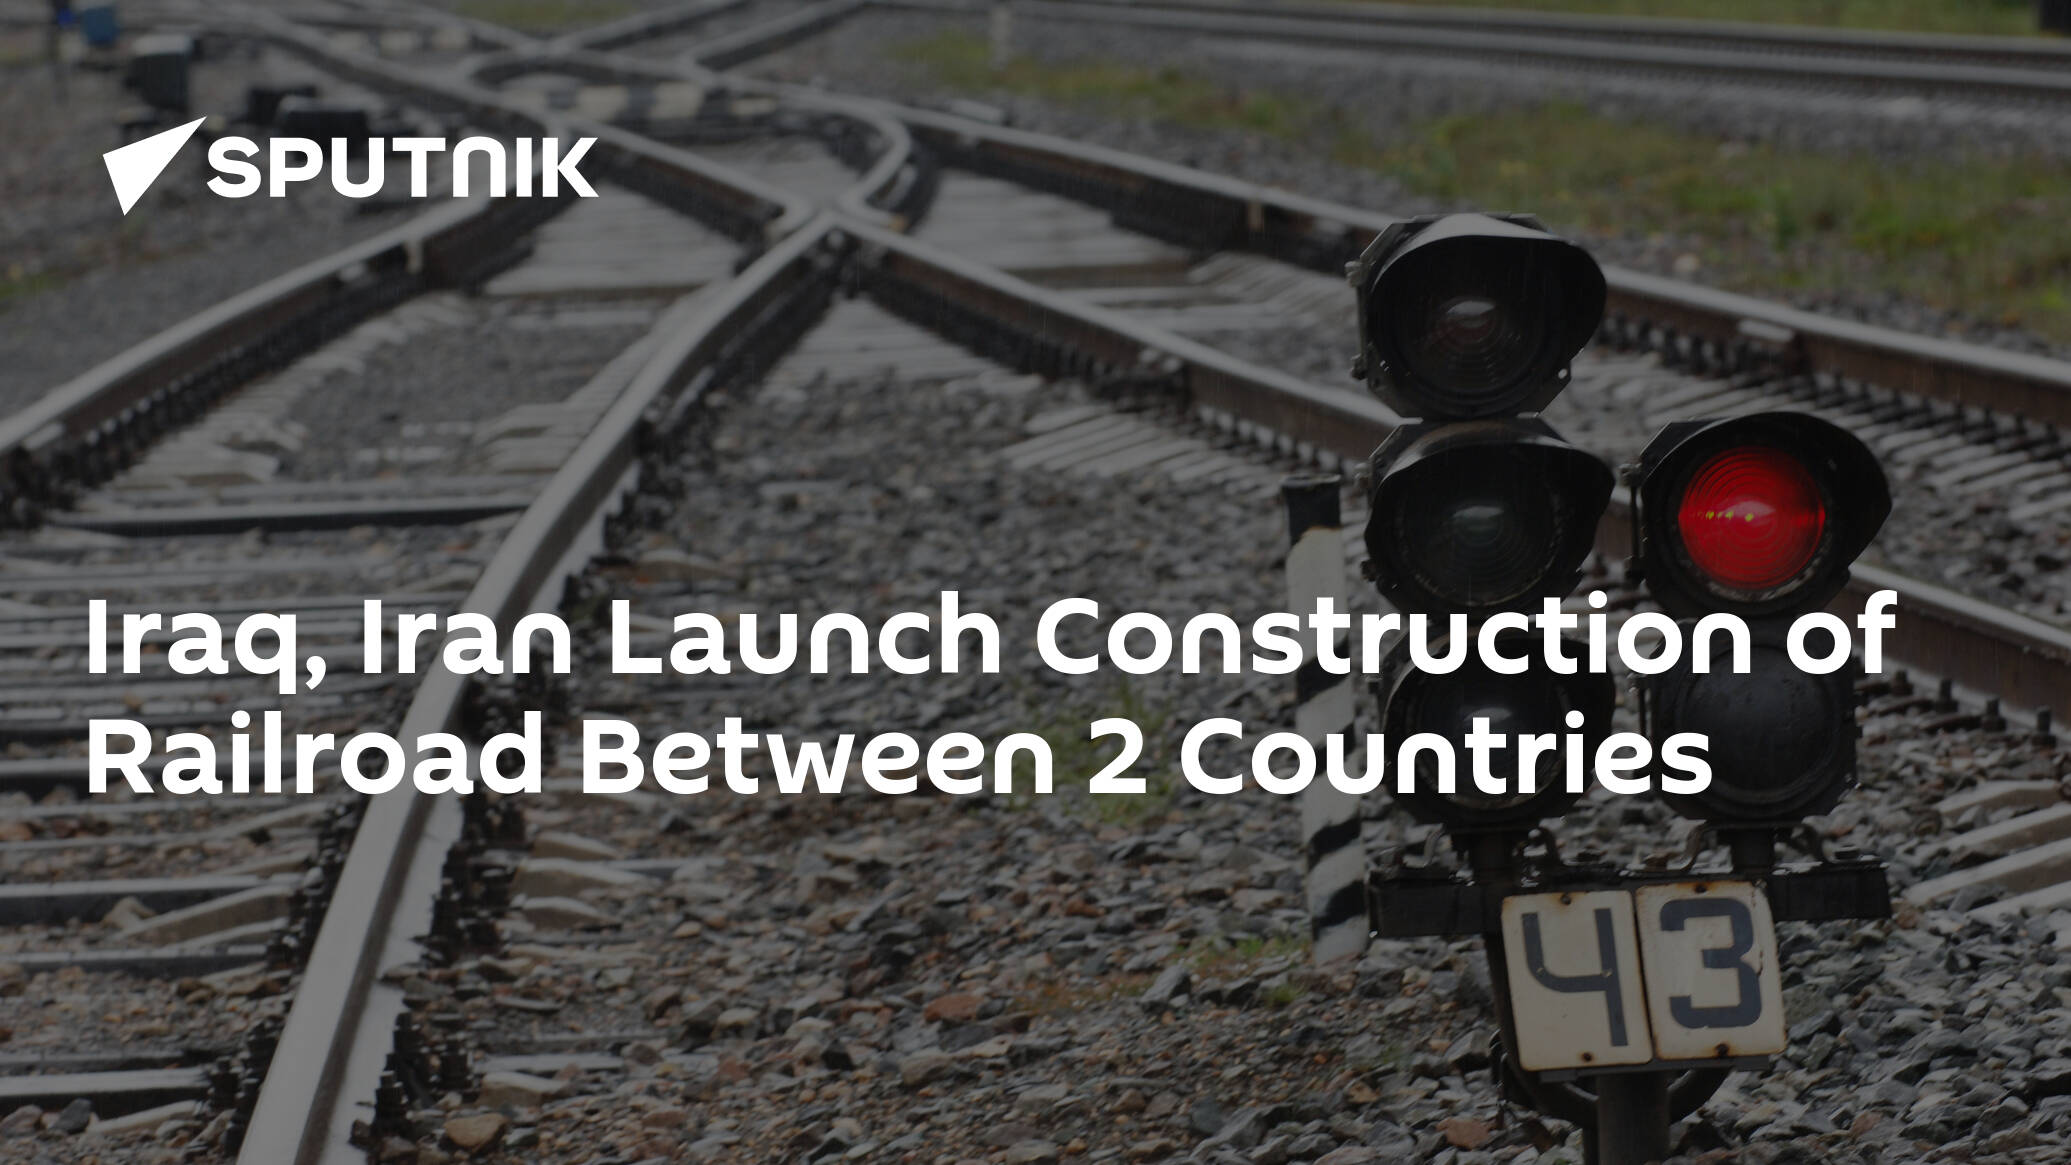 Iraq, Iran Launch Construction of Railroad Between 2 Countries